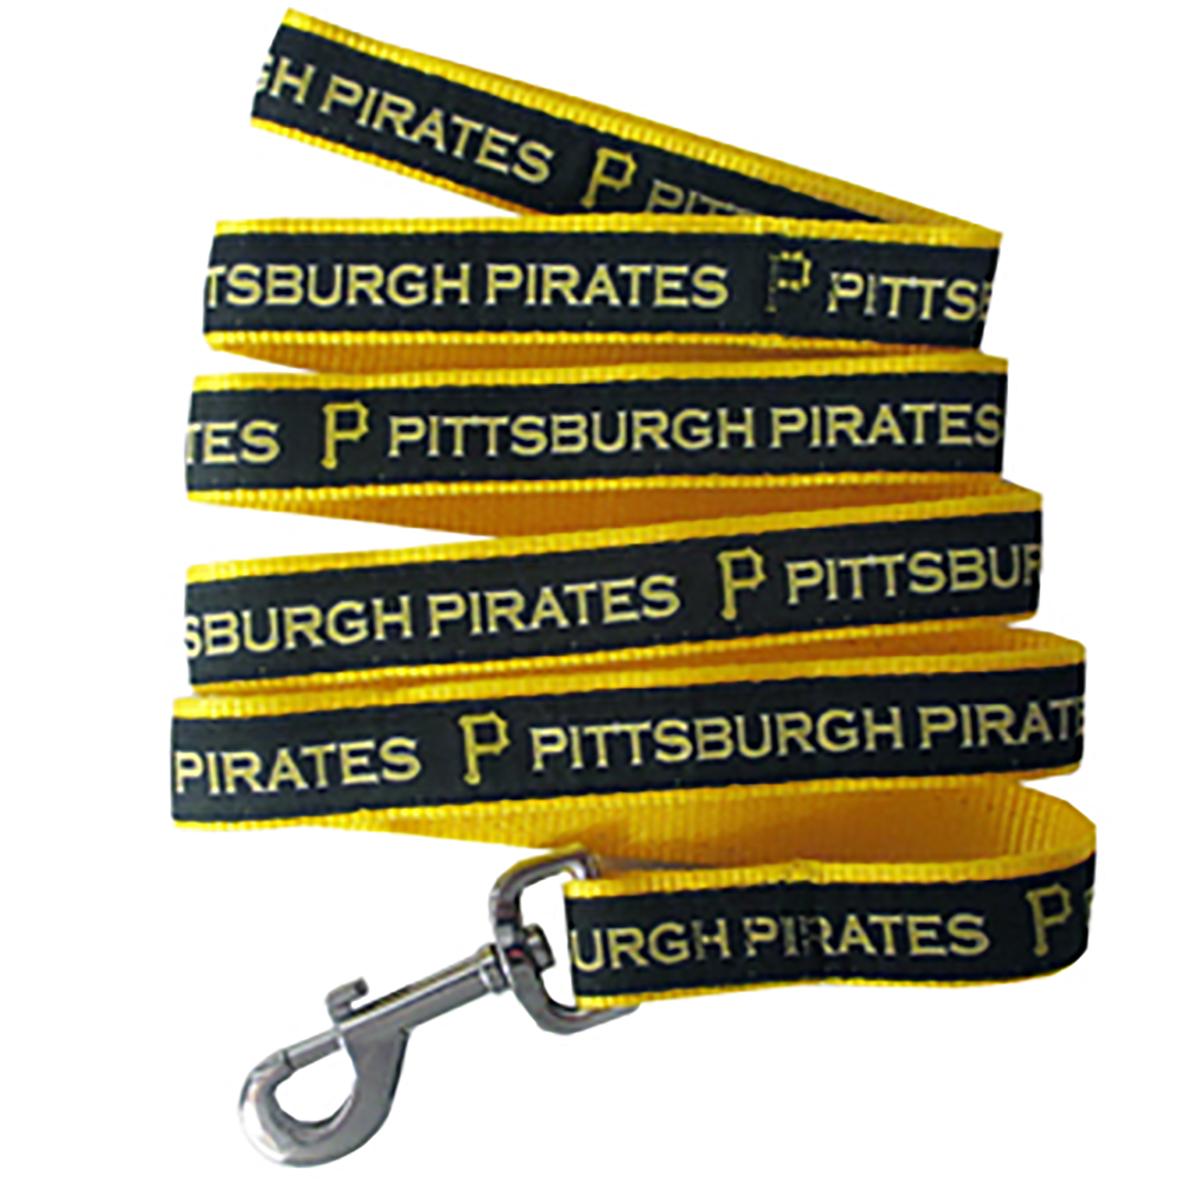 Pittsburgh Pirates Officially Licensed Dog Leash